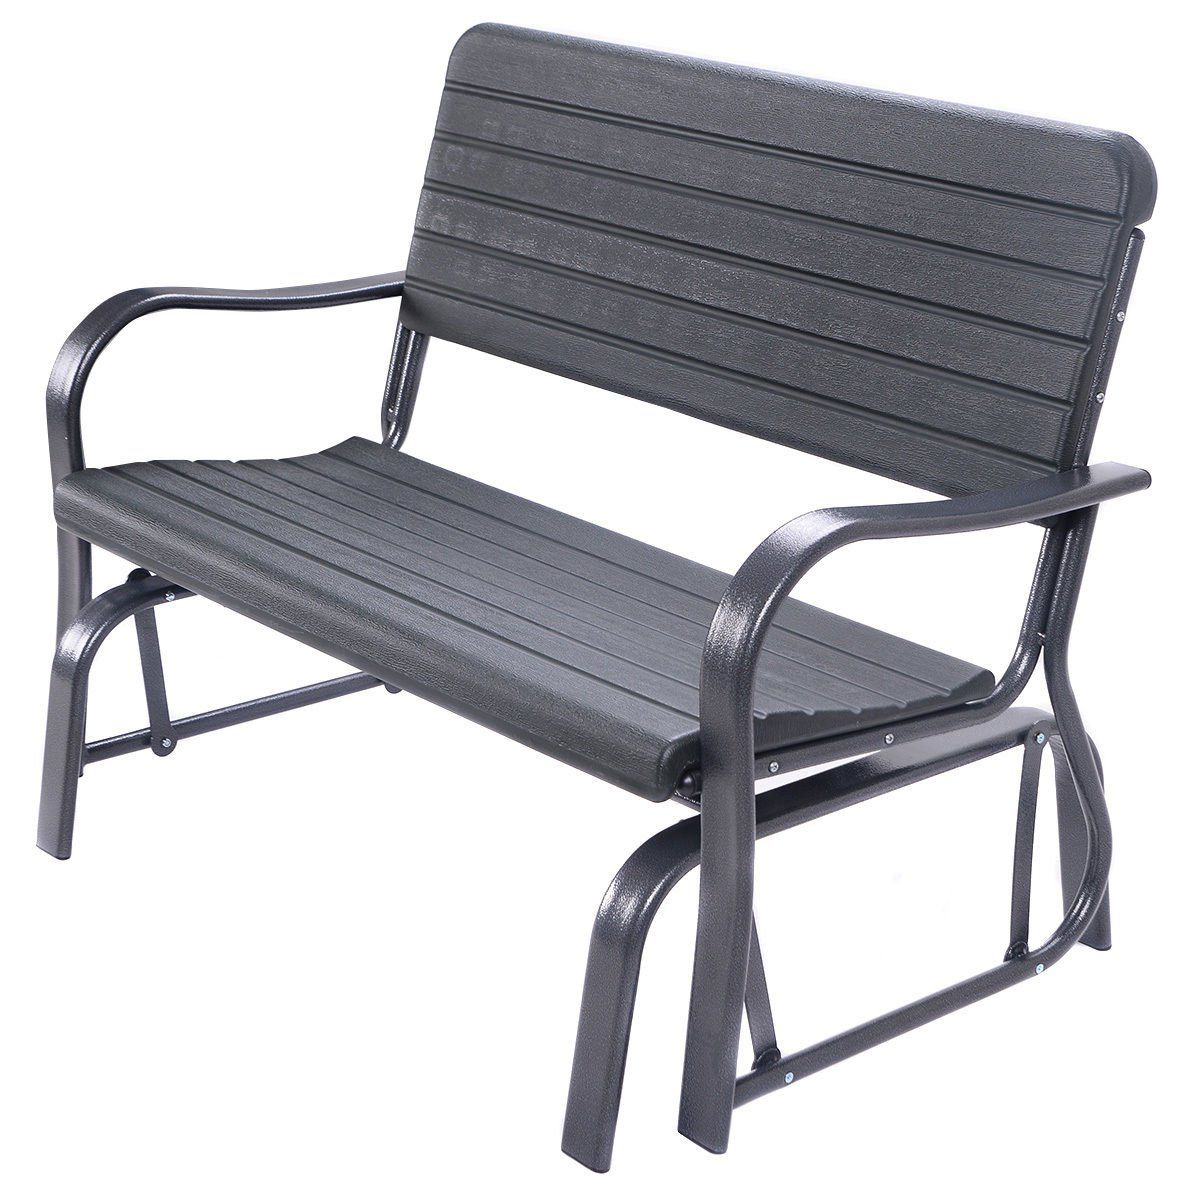 Amazon : Nature Republic Outdoor Patio Swing Porch Inside Newest Outdoor Patio Swing Glider Bench Chairs (View 2 of 30)